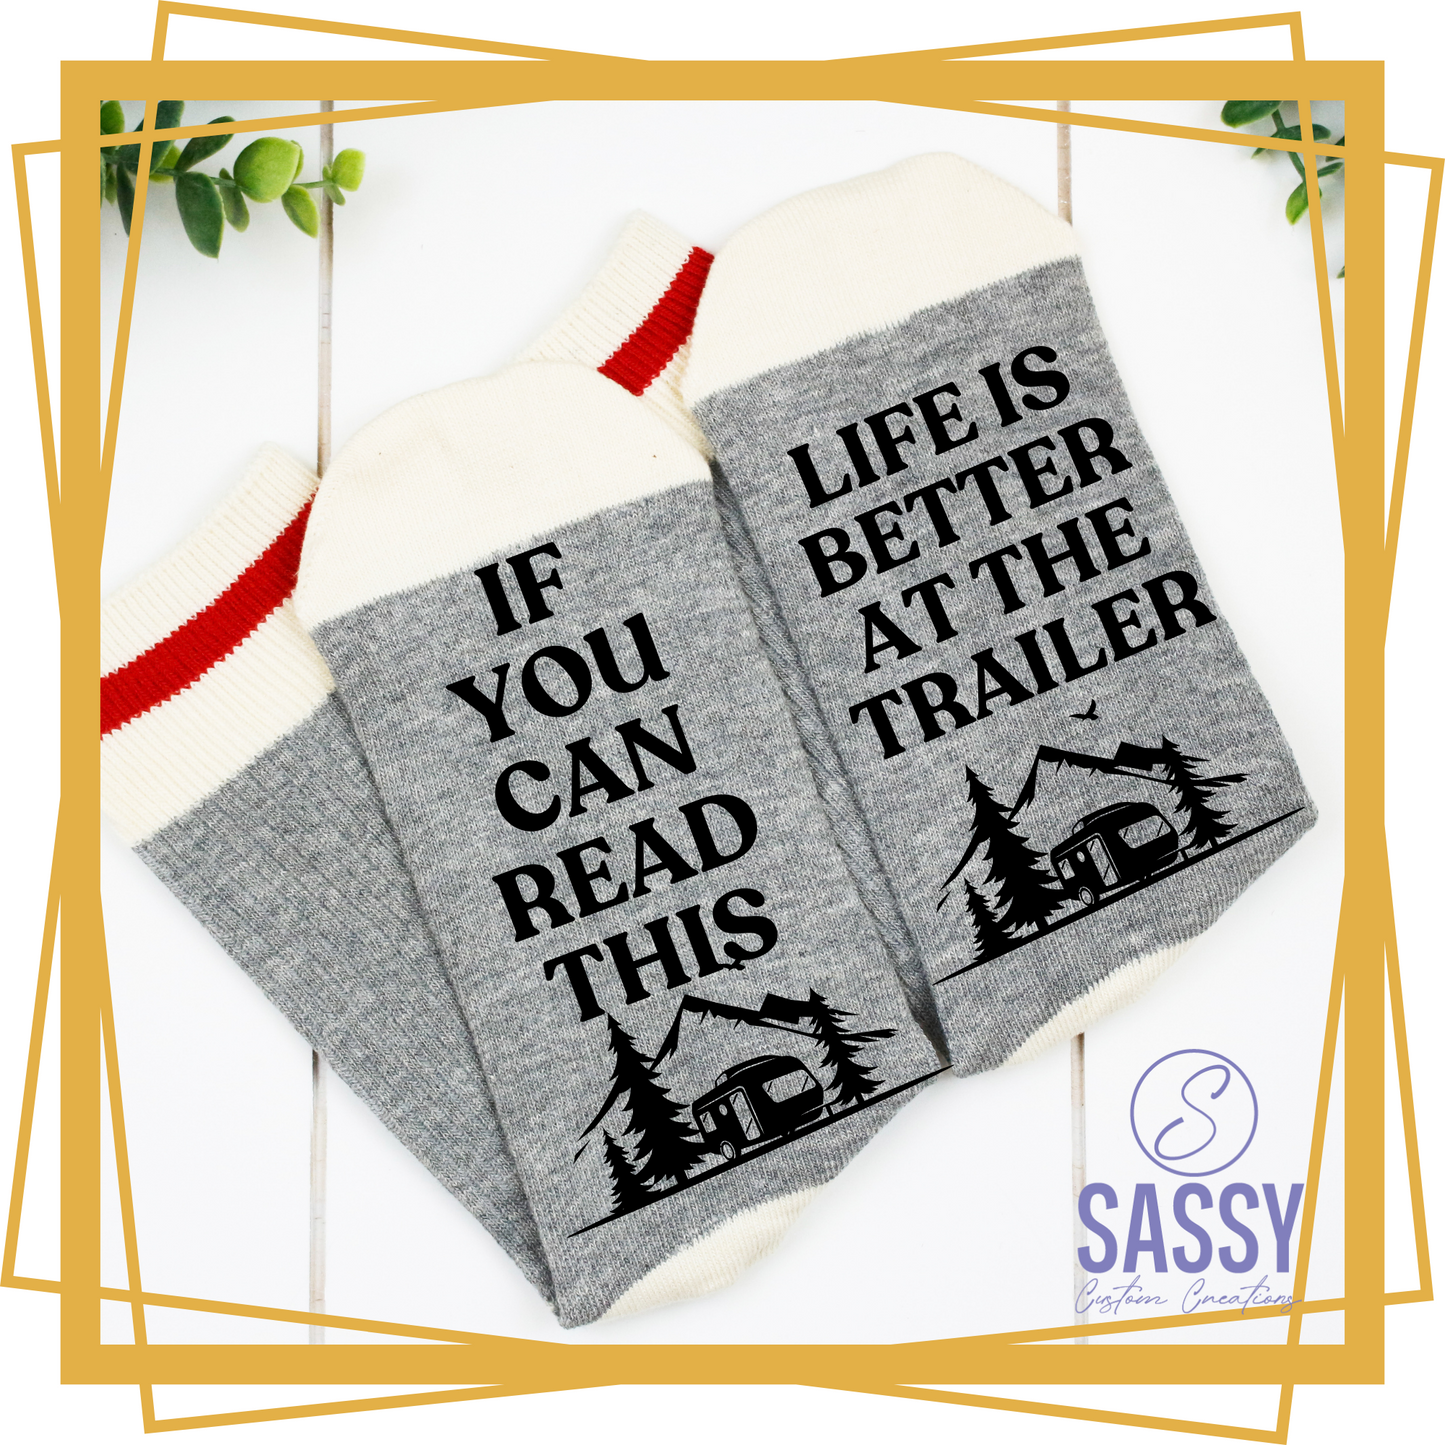 IF YOU CAN READ THIS, LIFE IS BETTER AT THE TRAILER